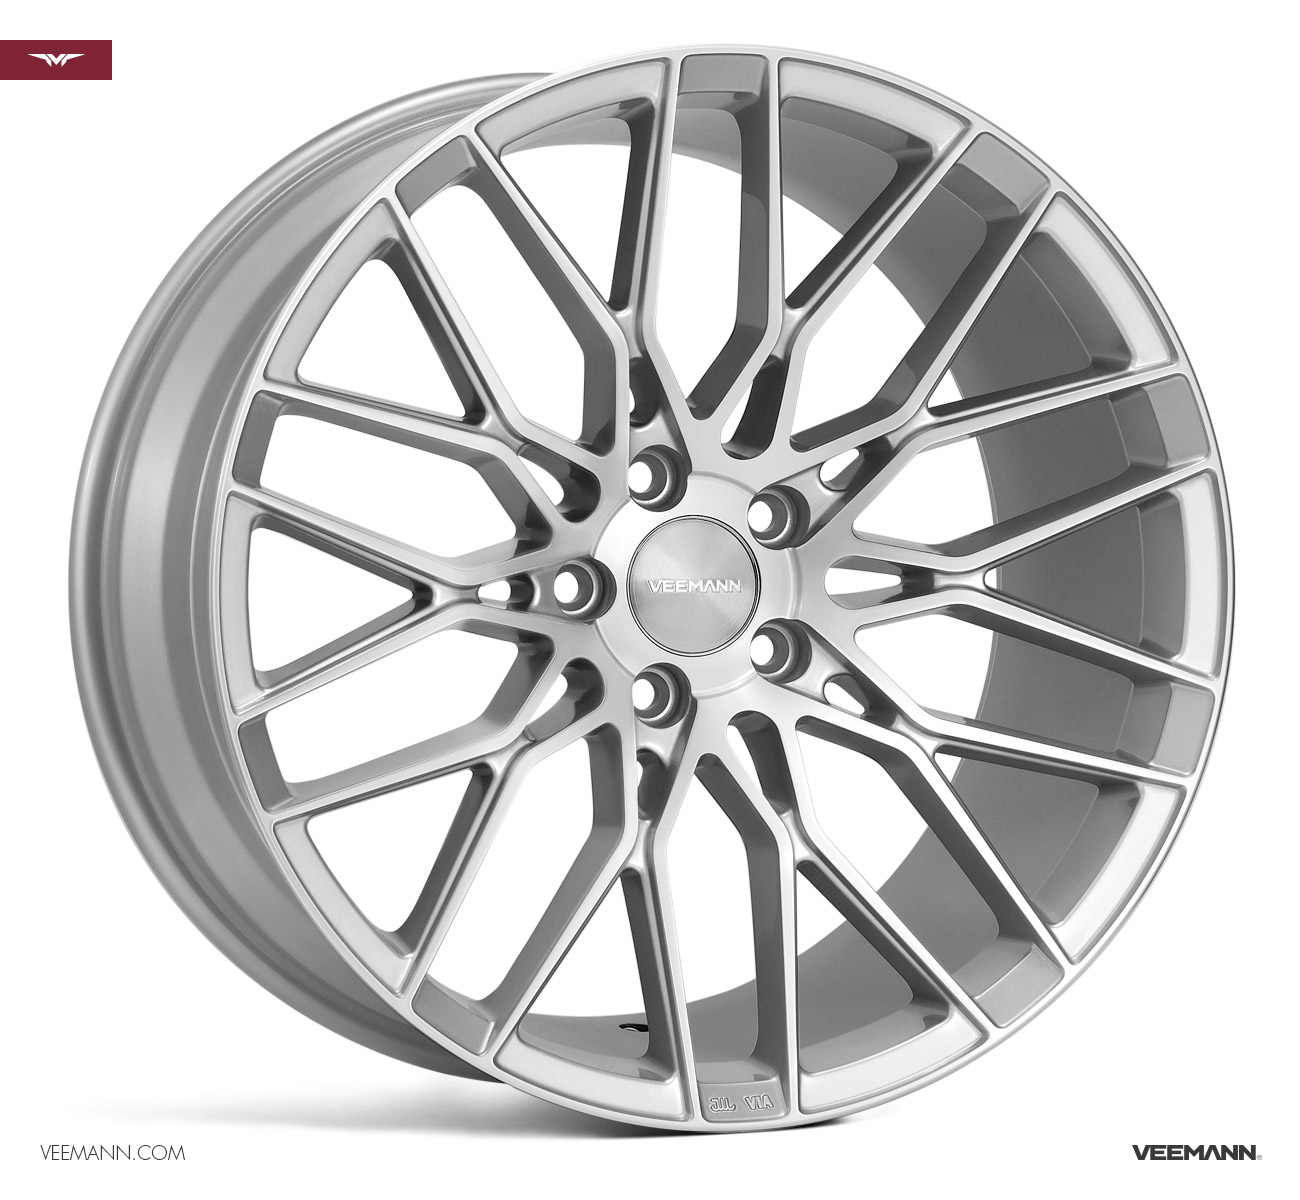 NEW 18" VEEMANN V-FS34 ALLOY WHEELS IN SILVER POL WITH WIDER 9" REARS ET42/42